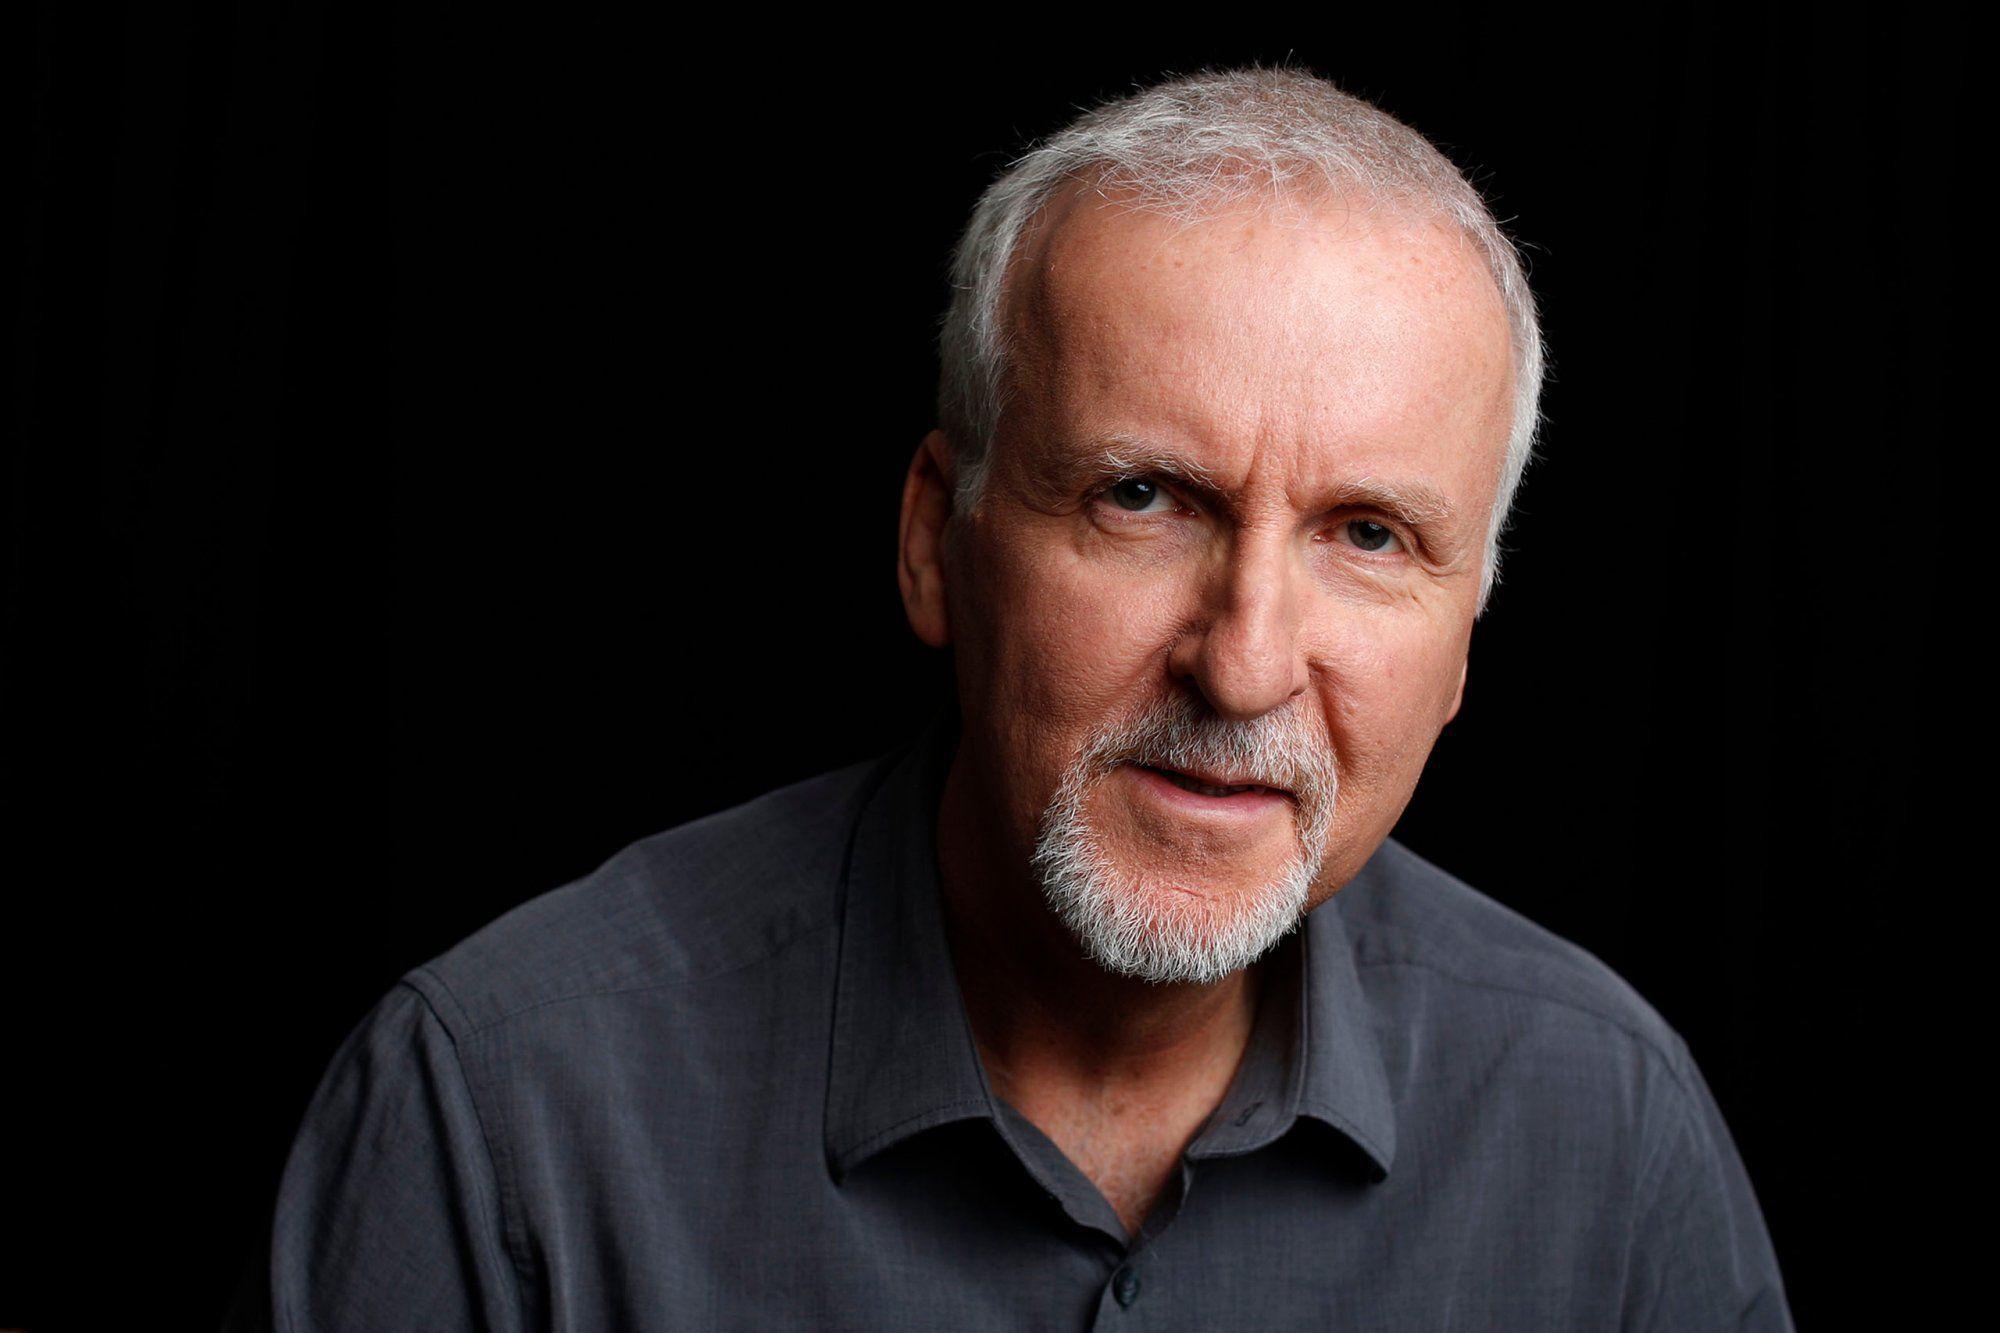 James Cameron Wallpaper Image Photo Picture Background